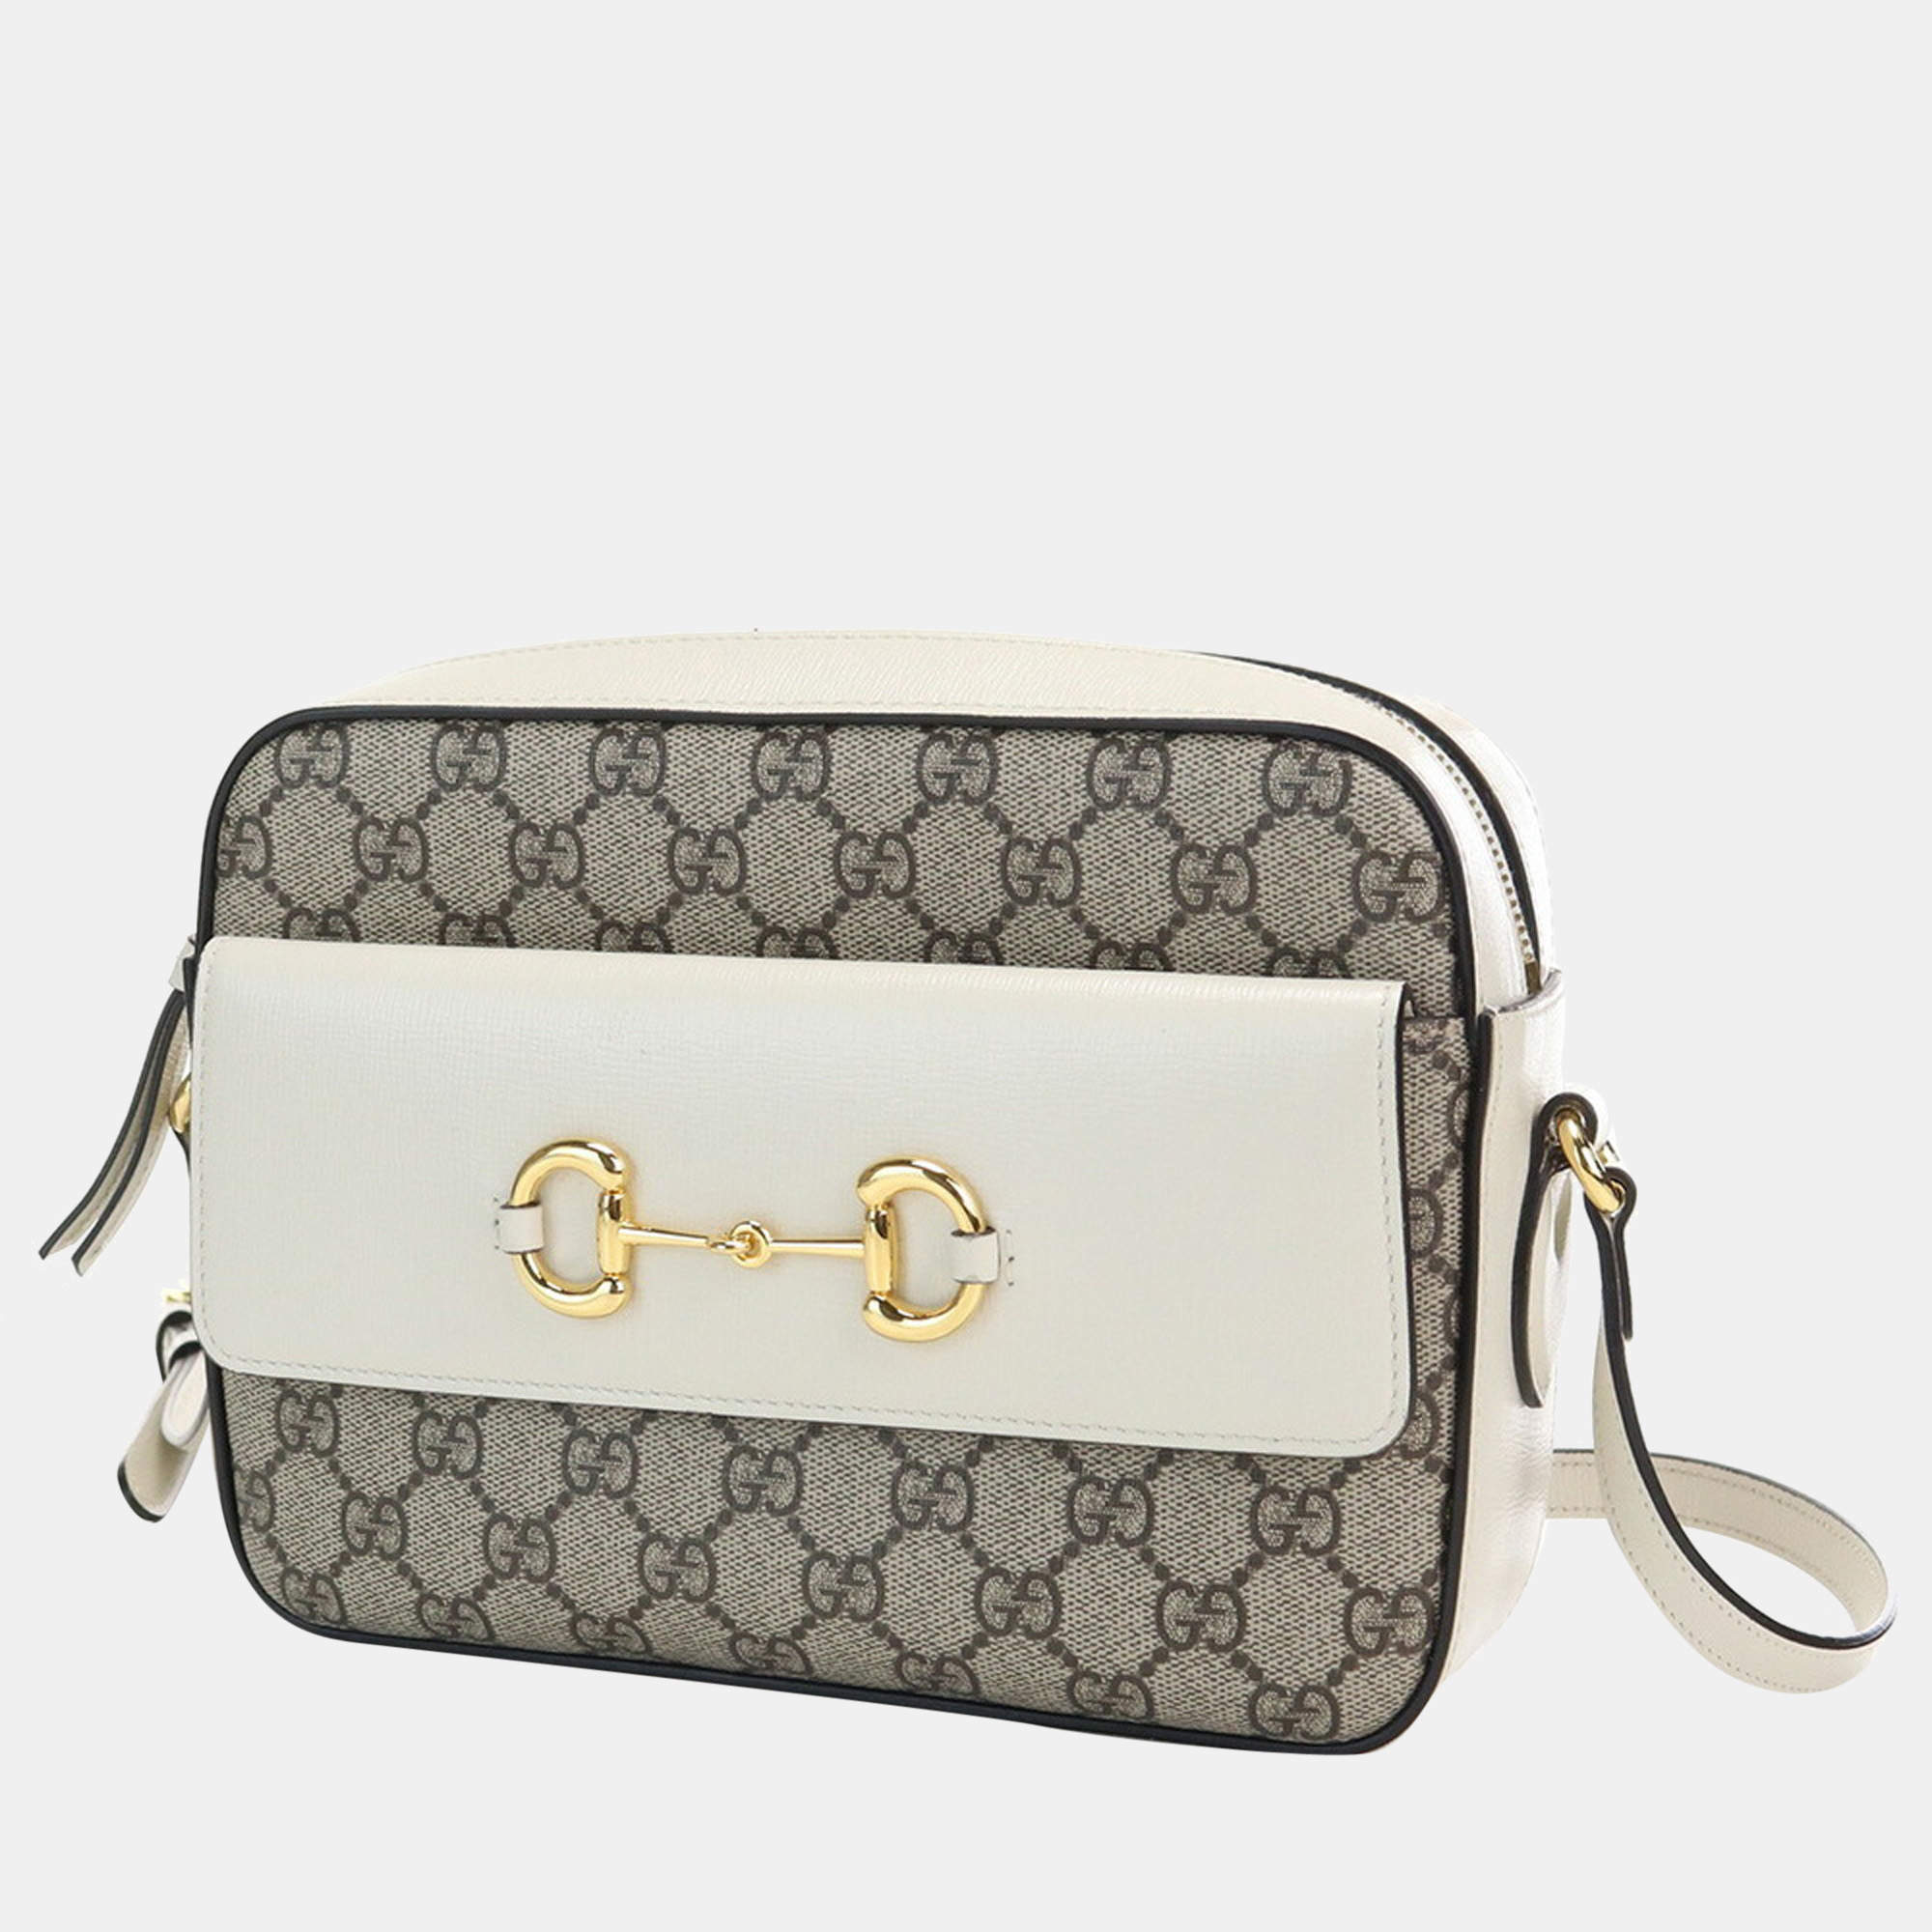 Gucci Horsebit 1955 Mini Bag Beige/White in Canvas/Leather with